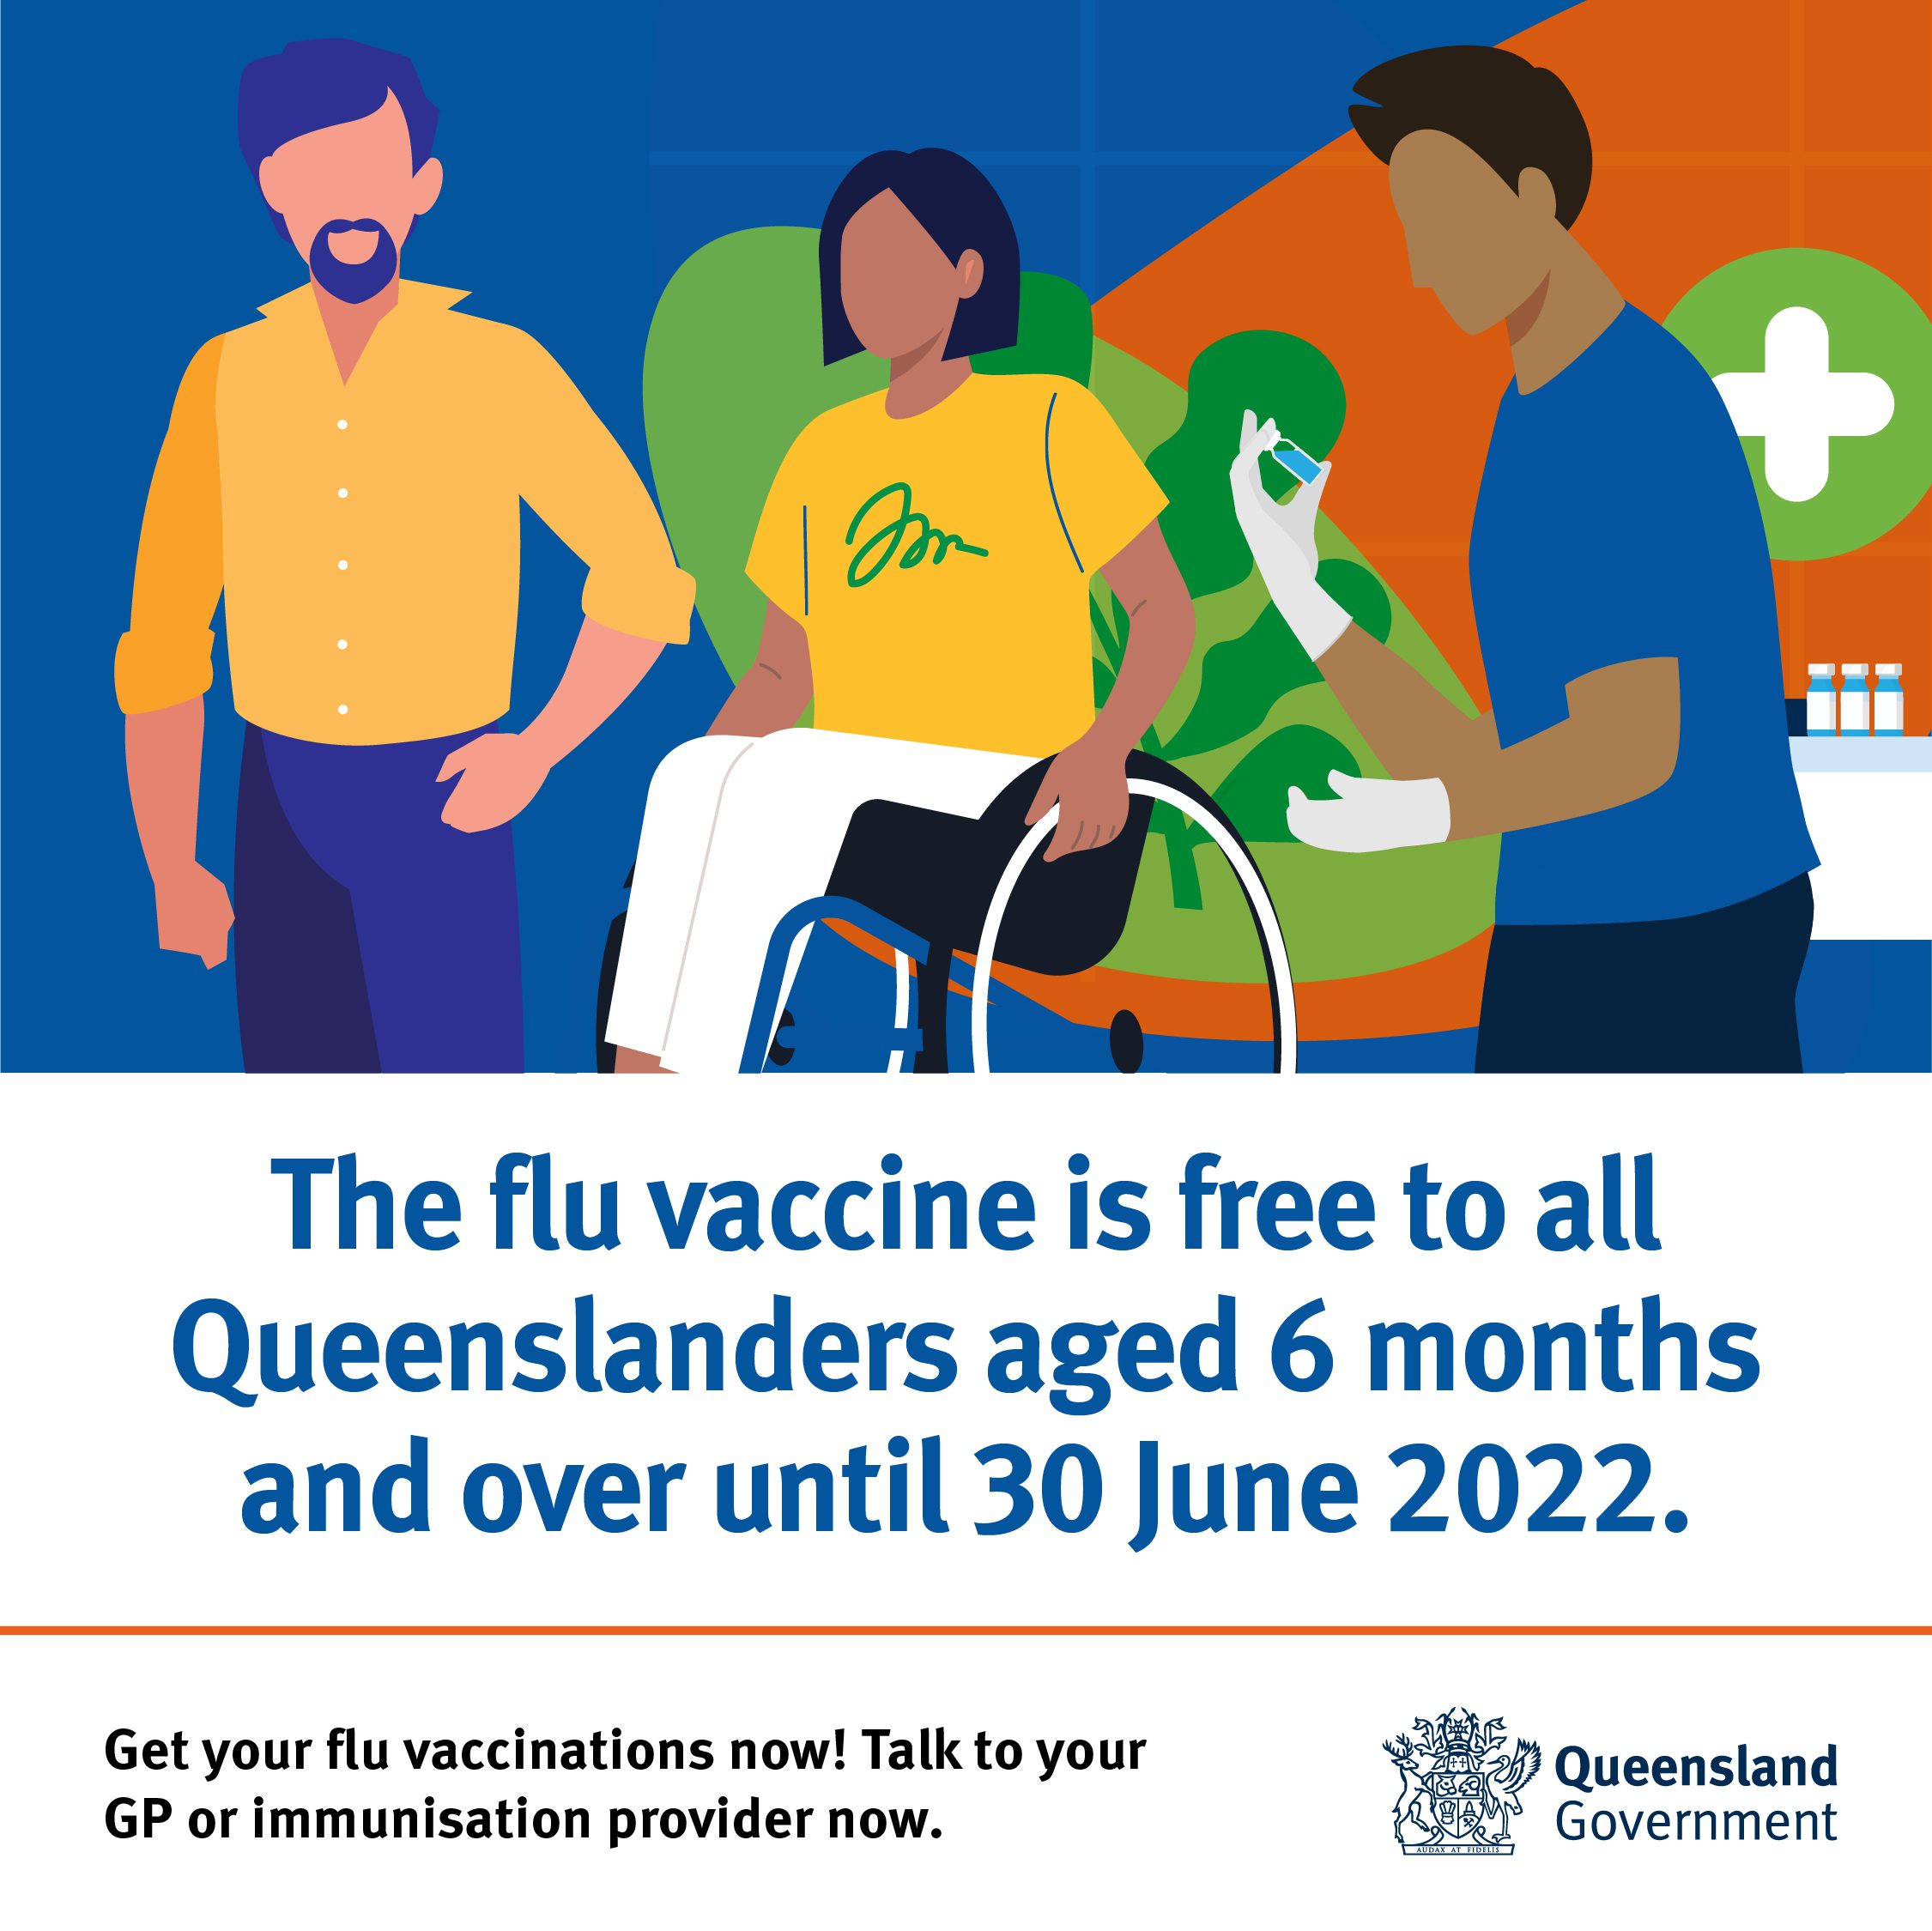 The flu vaccine is free to all Queenslanders aged 6 months and over until 30 June 2022. Get your flu vaccinations now! Talk to your GP or immunisation provider now. Queensland Government. There is a graphic of three people, a man standing next to a woman in a wheel chair and then another man who looks like a doctor holding a injection.